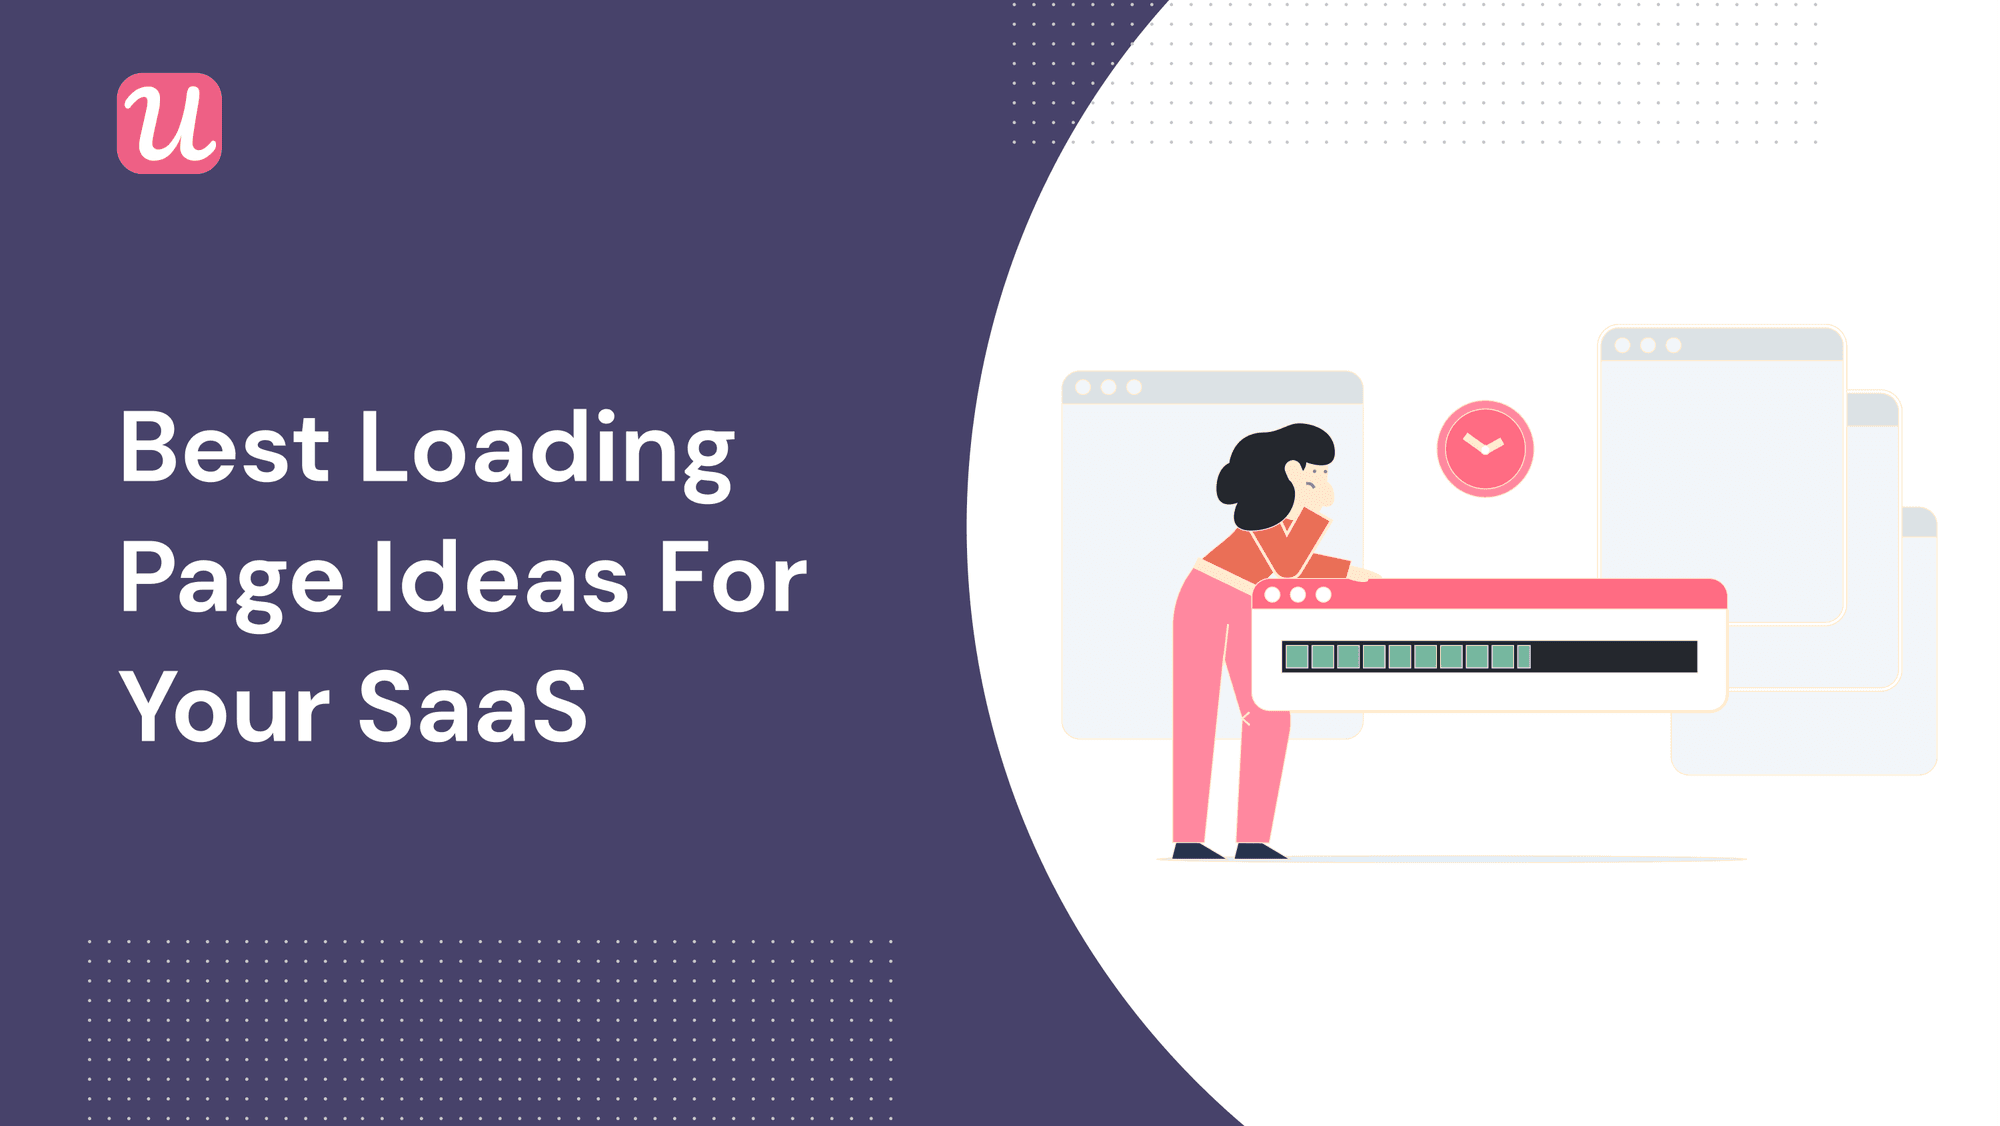 10 Best Loading Page Examples For SaaS That Users Actually Want To See